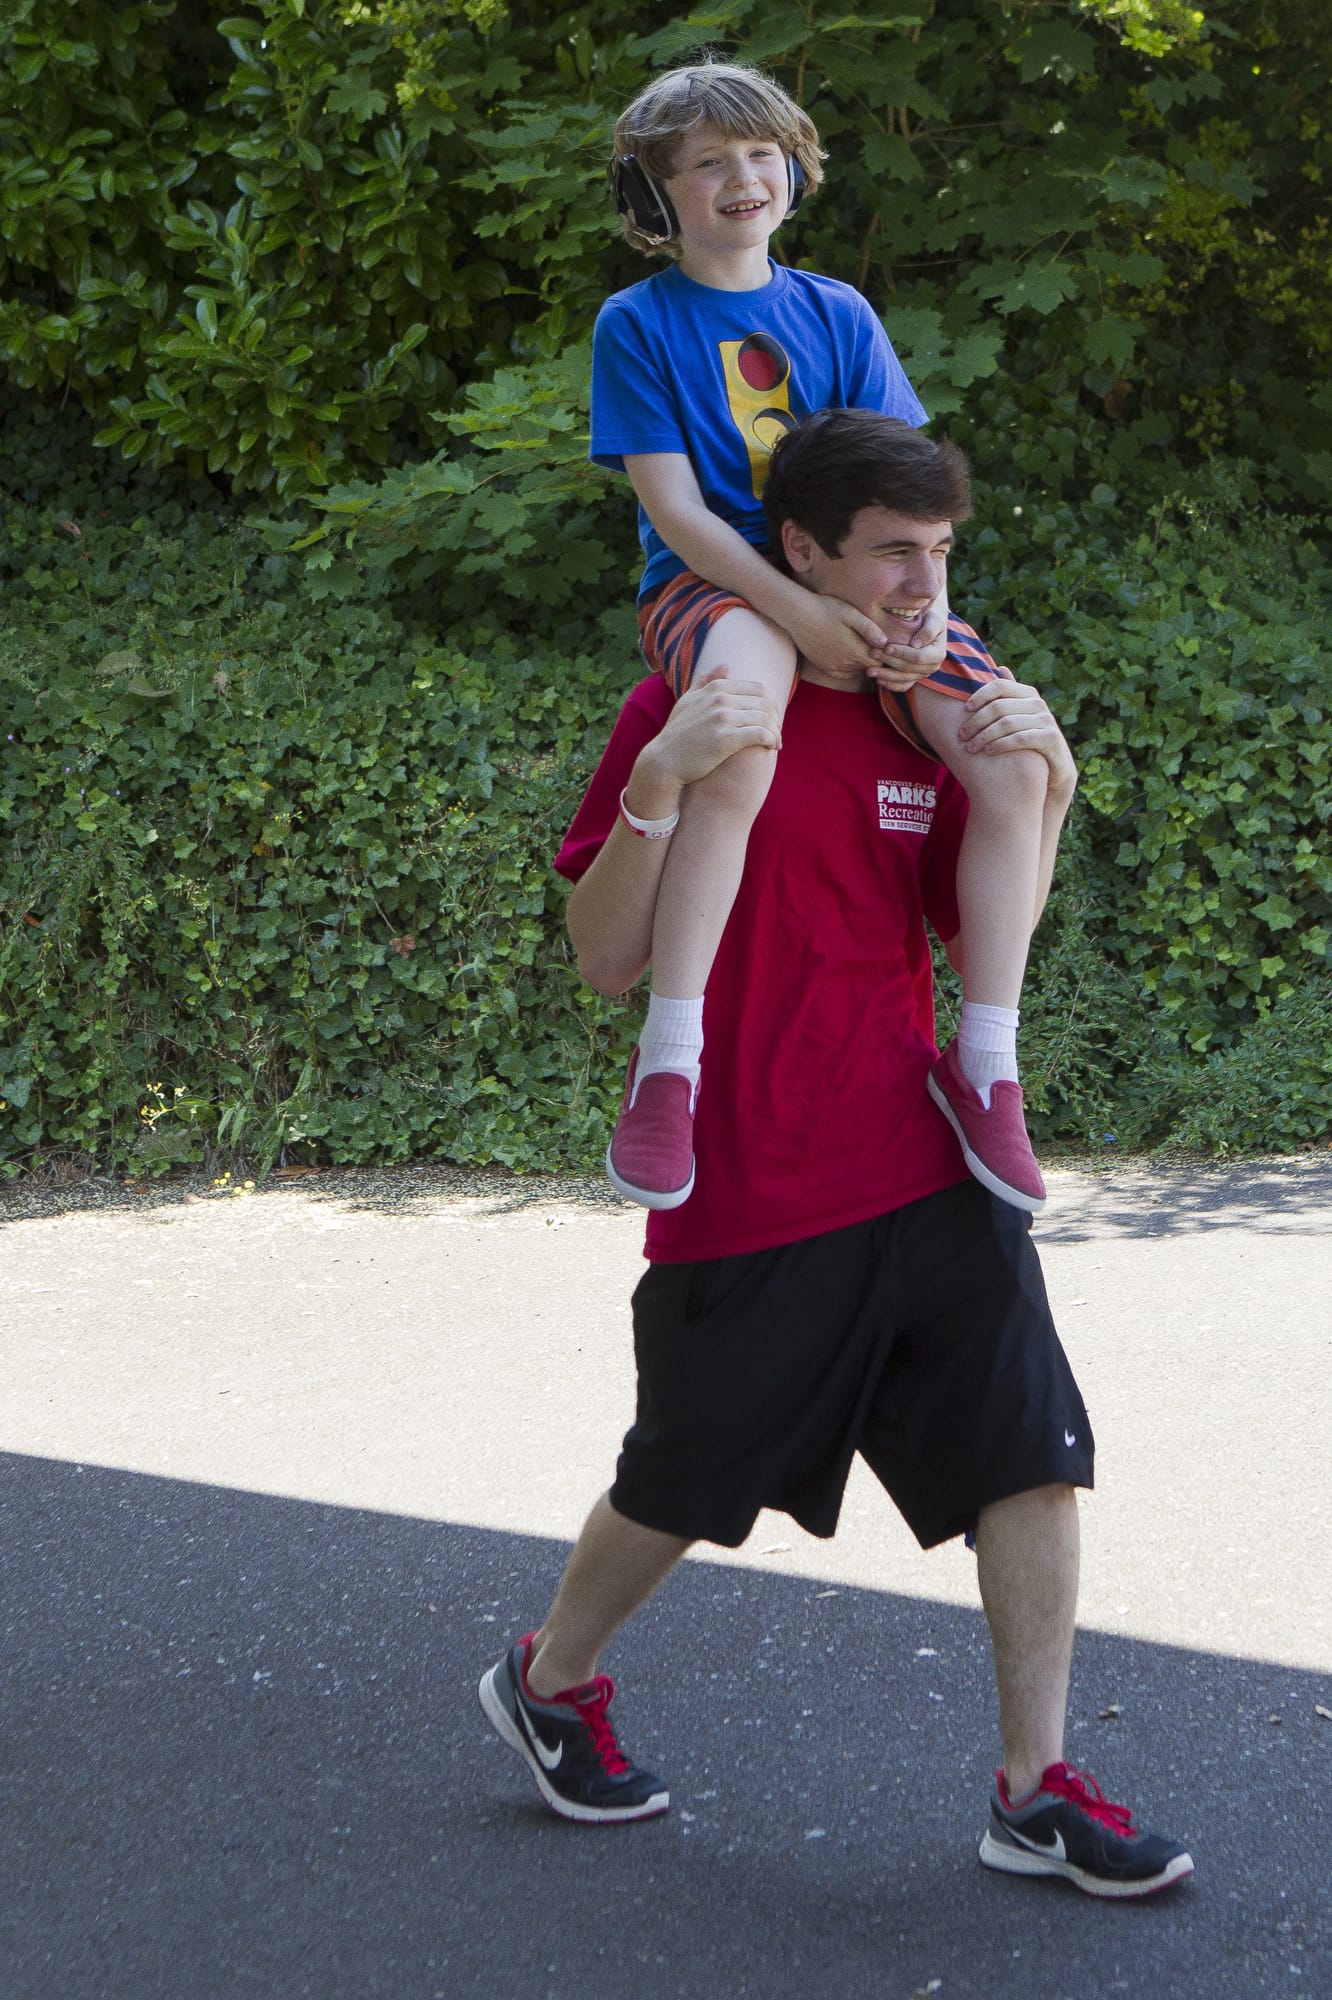 Esther Short: Trevor Saleg gives a lift to Jacob Wood at Sensory Camp, which caters to kids on the autism spectrum and with other special needs, in 2013.